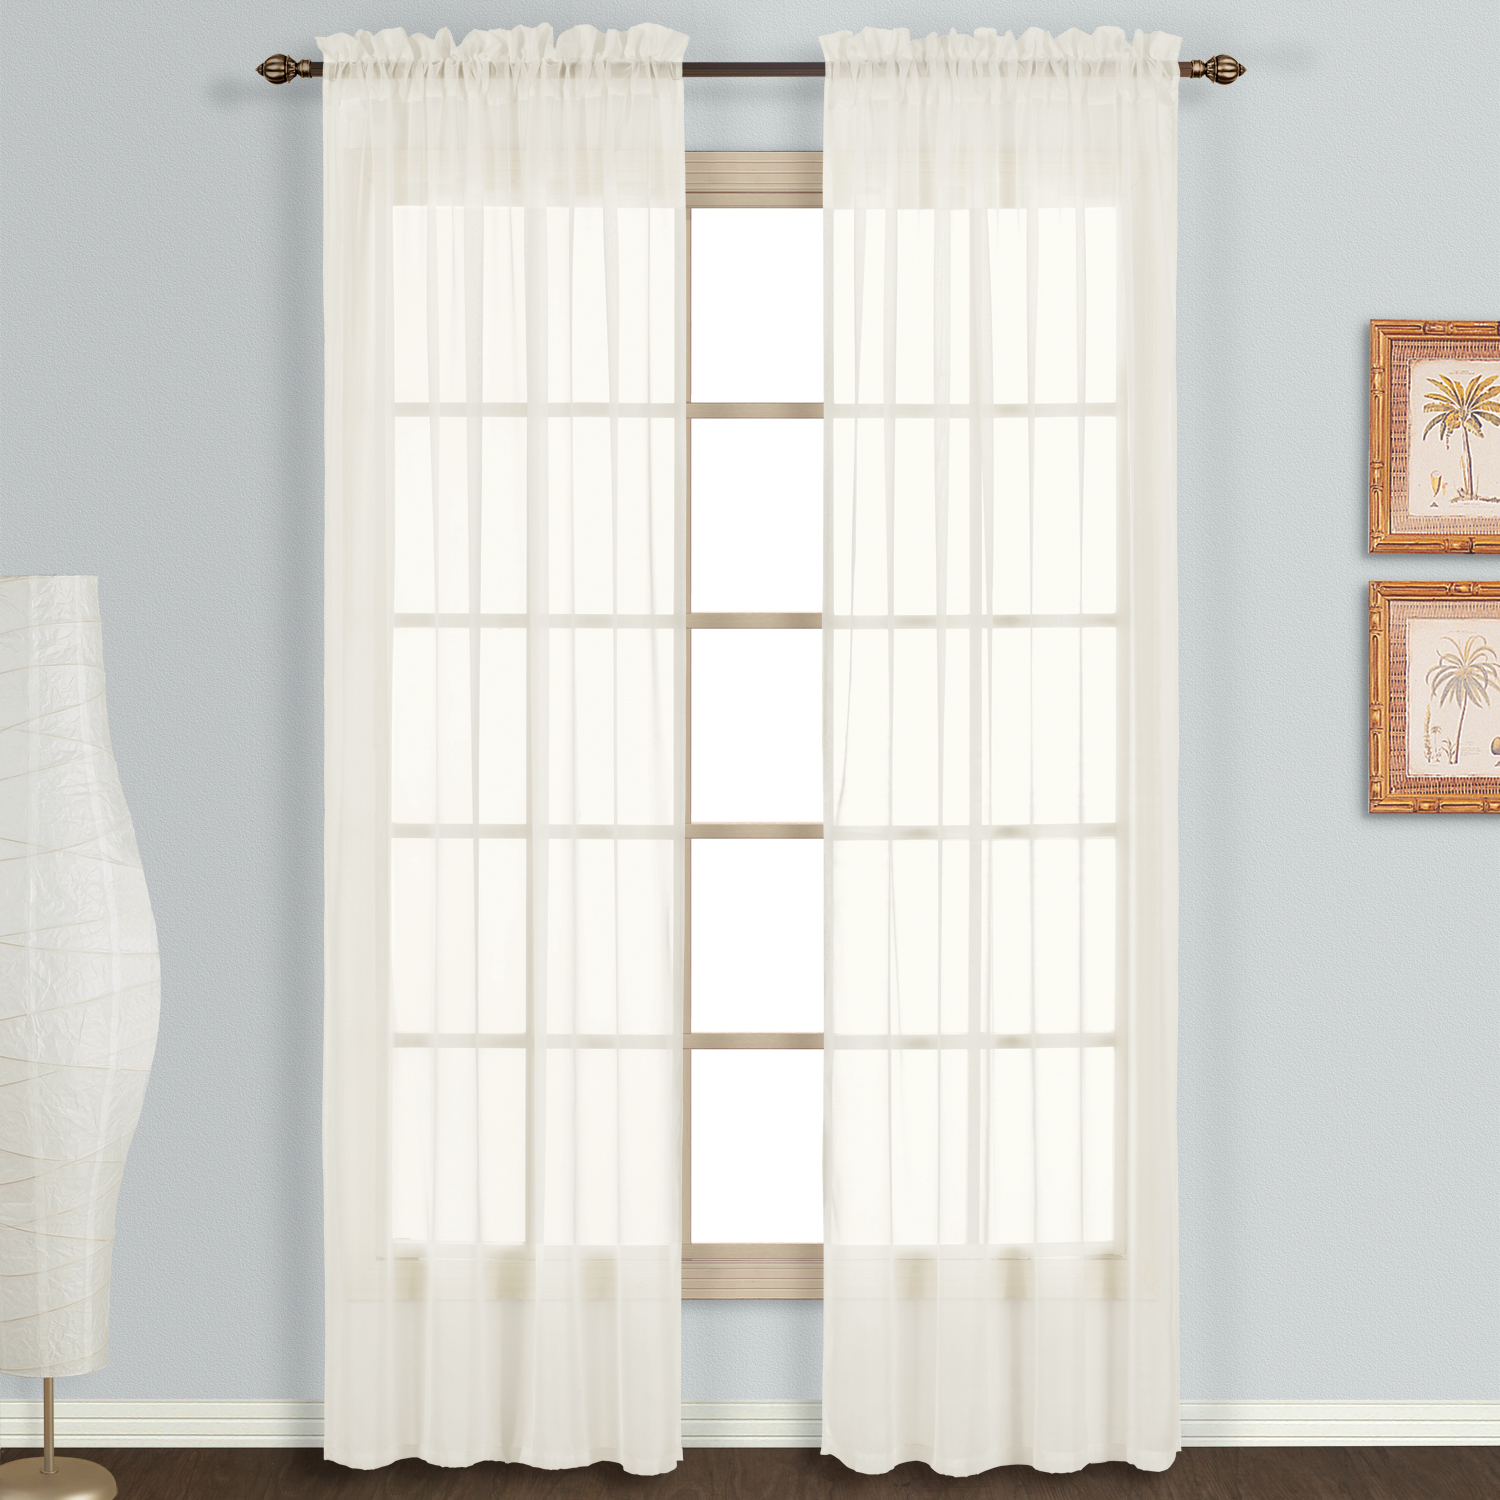 United Curtain Company Monte Carlo 118" x 84" voile window panel pair